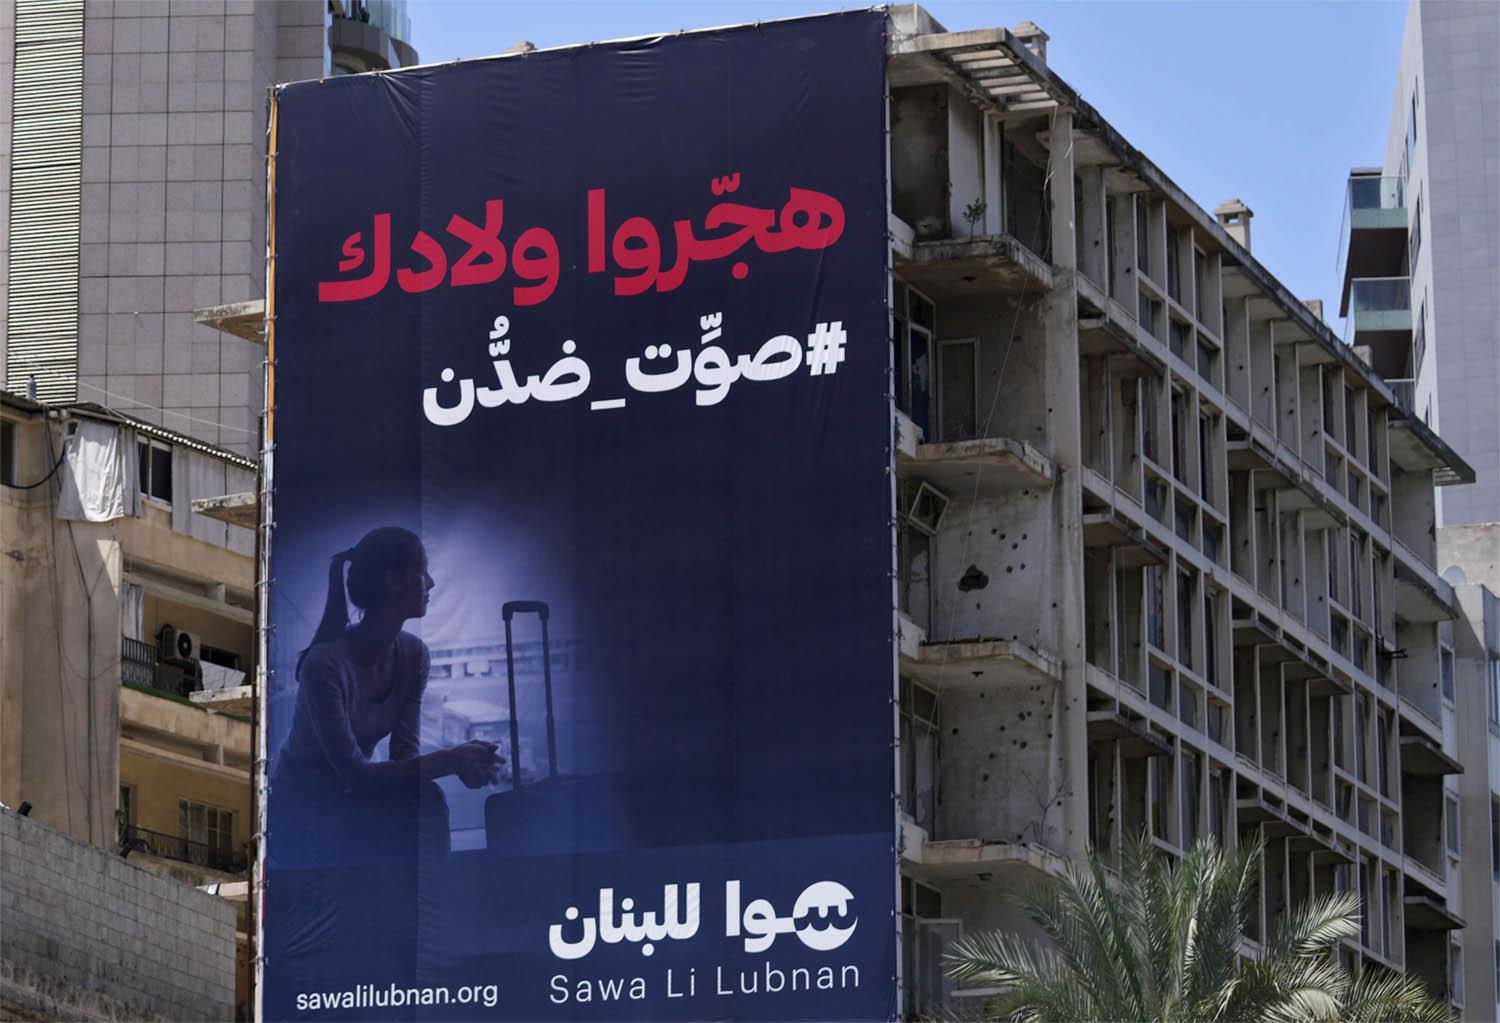 The May 15 elections for parliament are the first since Lebanon’s economic meltdown began in late 2019